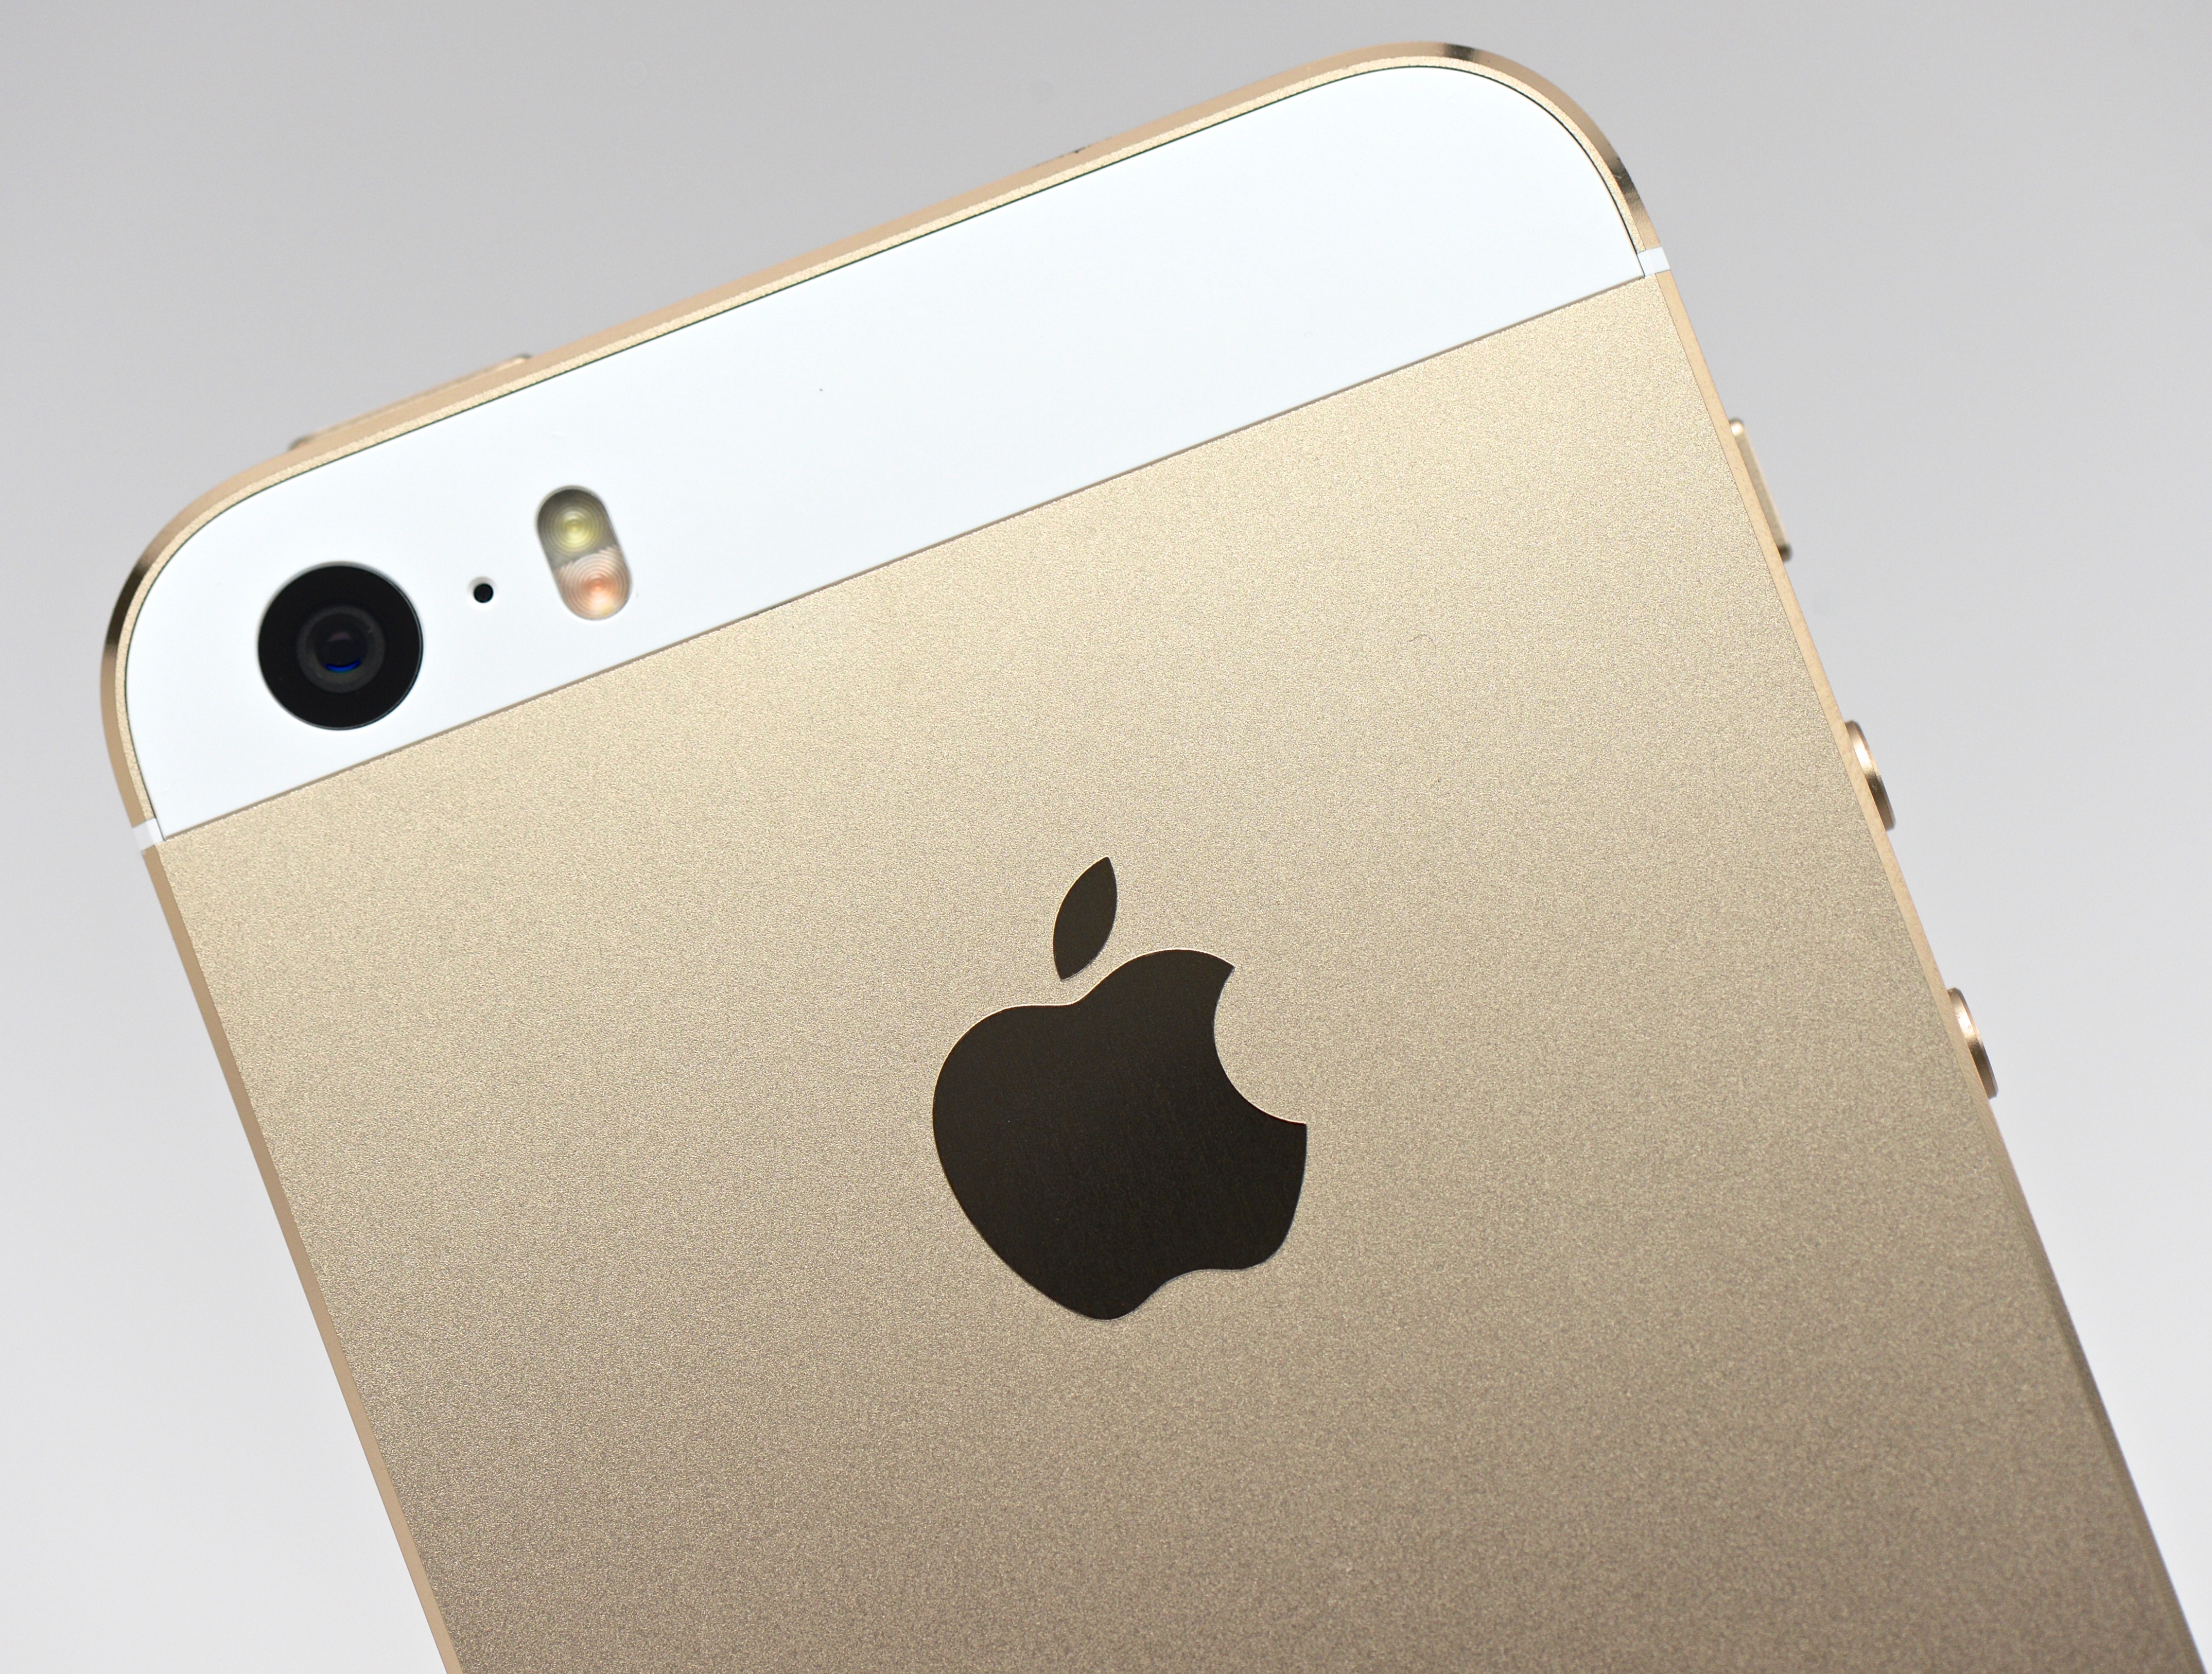 iphone-5s-review-gold-white-5.jpg